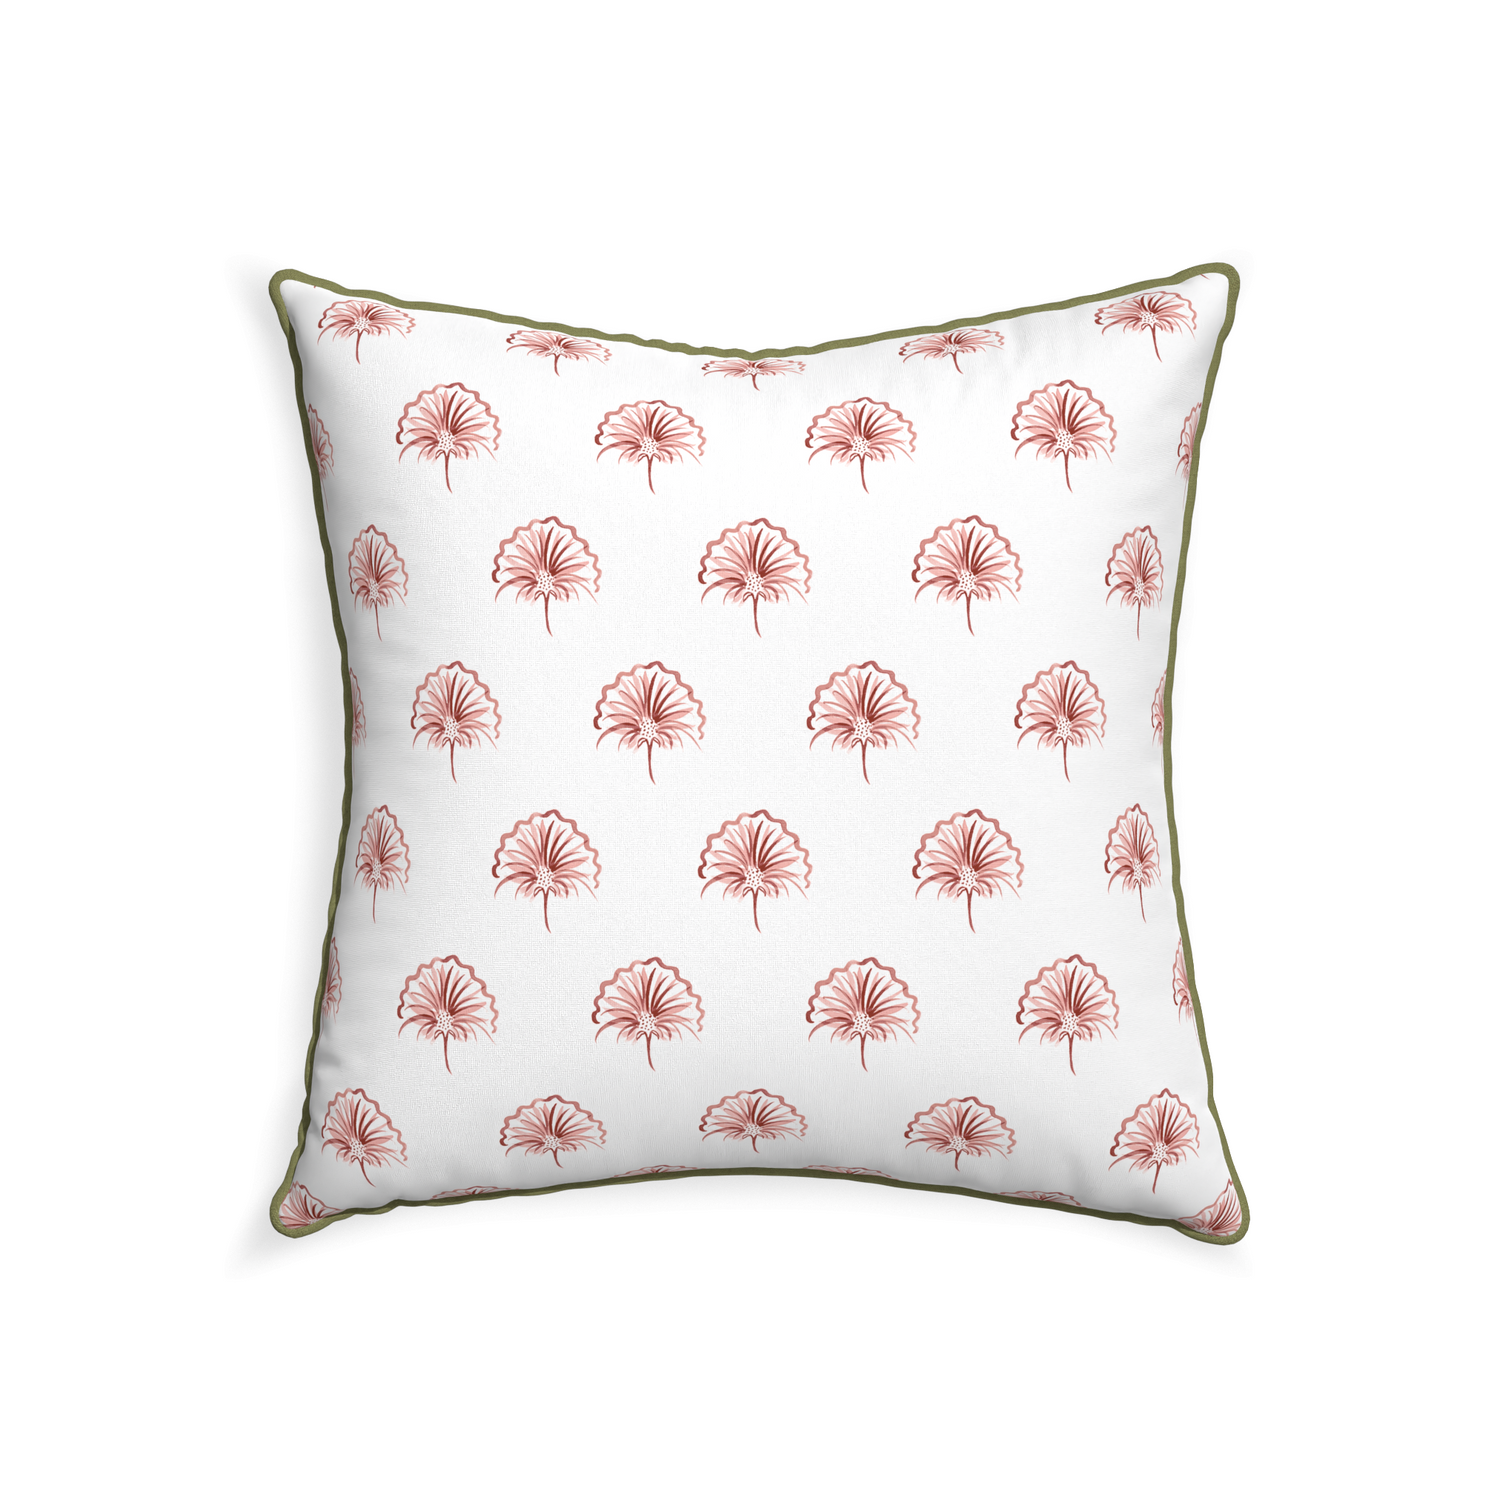 22-square penelope rose custom floral pinkpillow with moss piping on white background